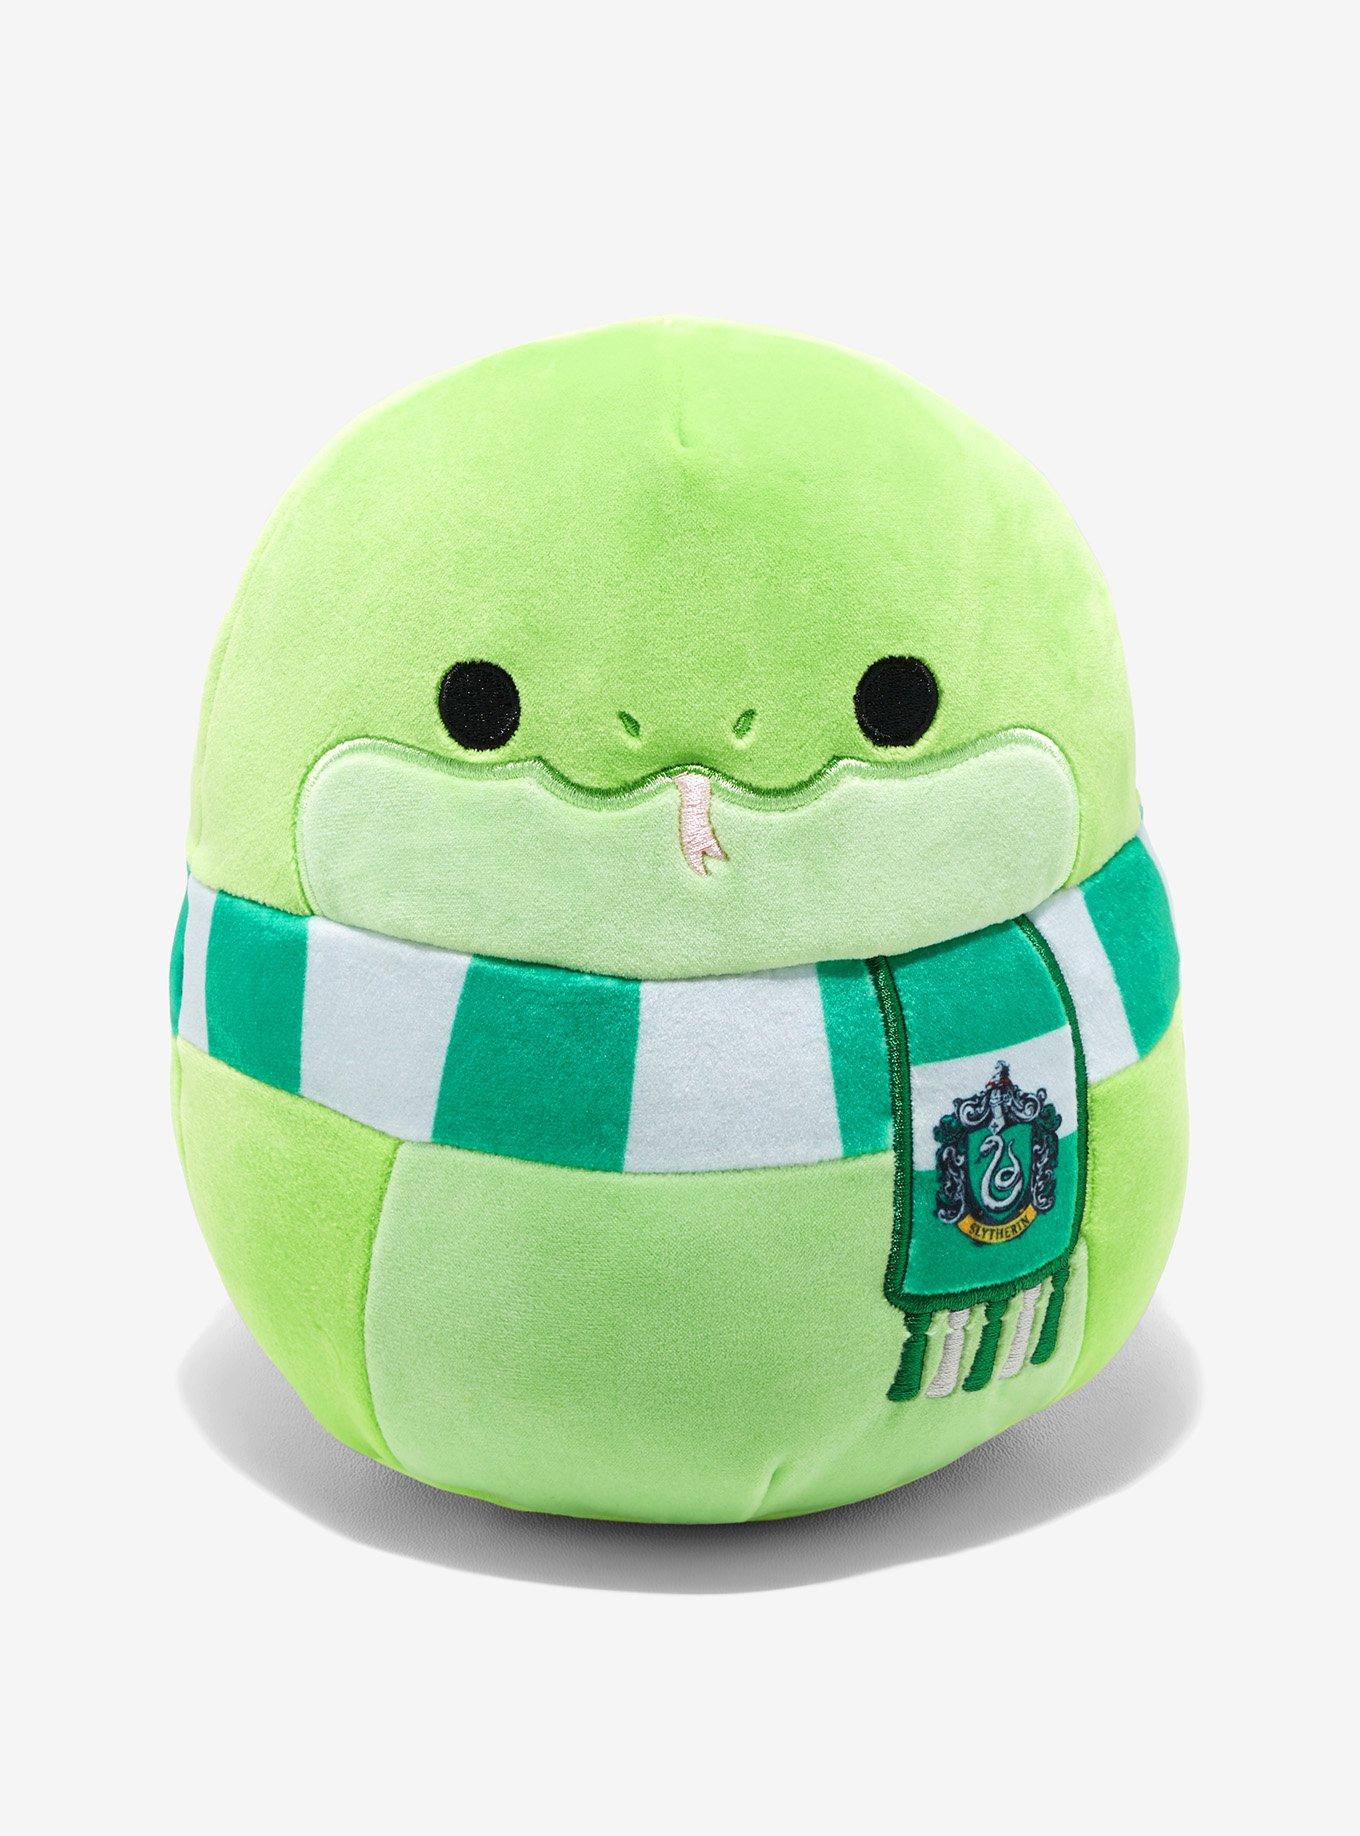 NEW Harry potter #squishmallows spotted at Hot Topic #gryffindor  #harrypotter #collective 